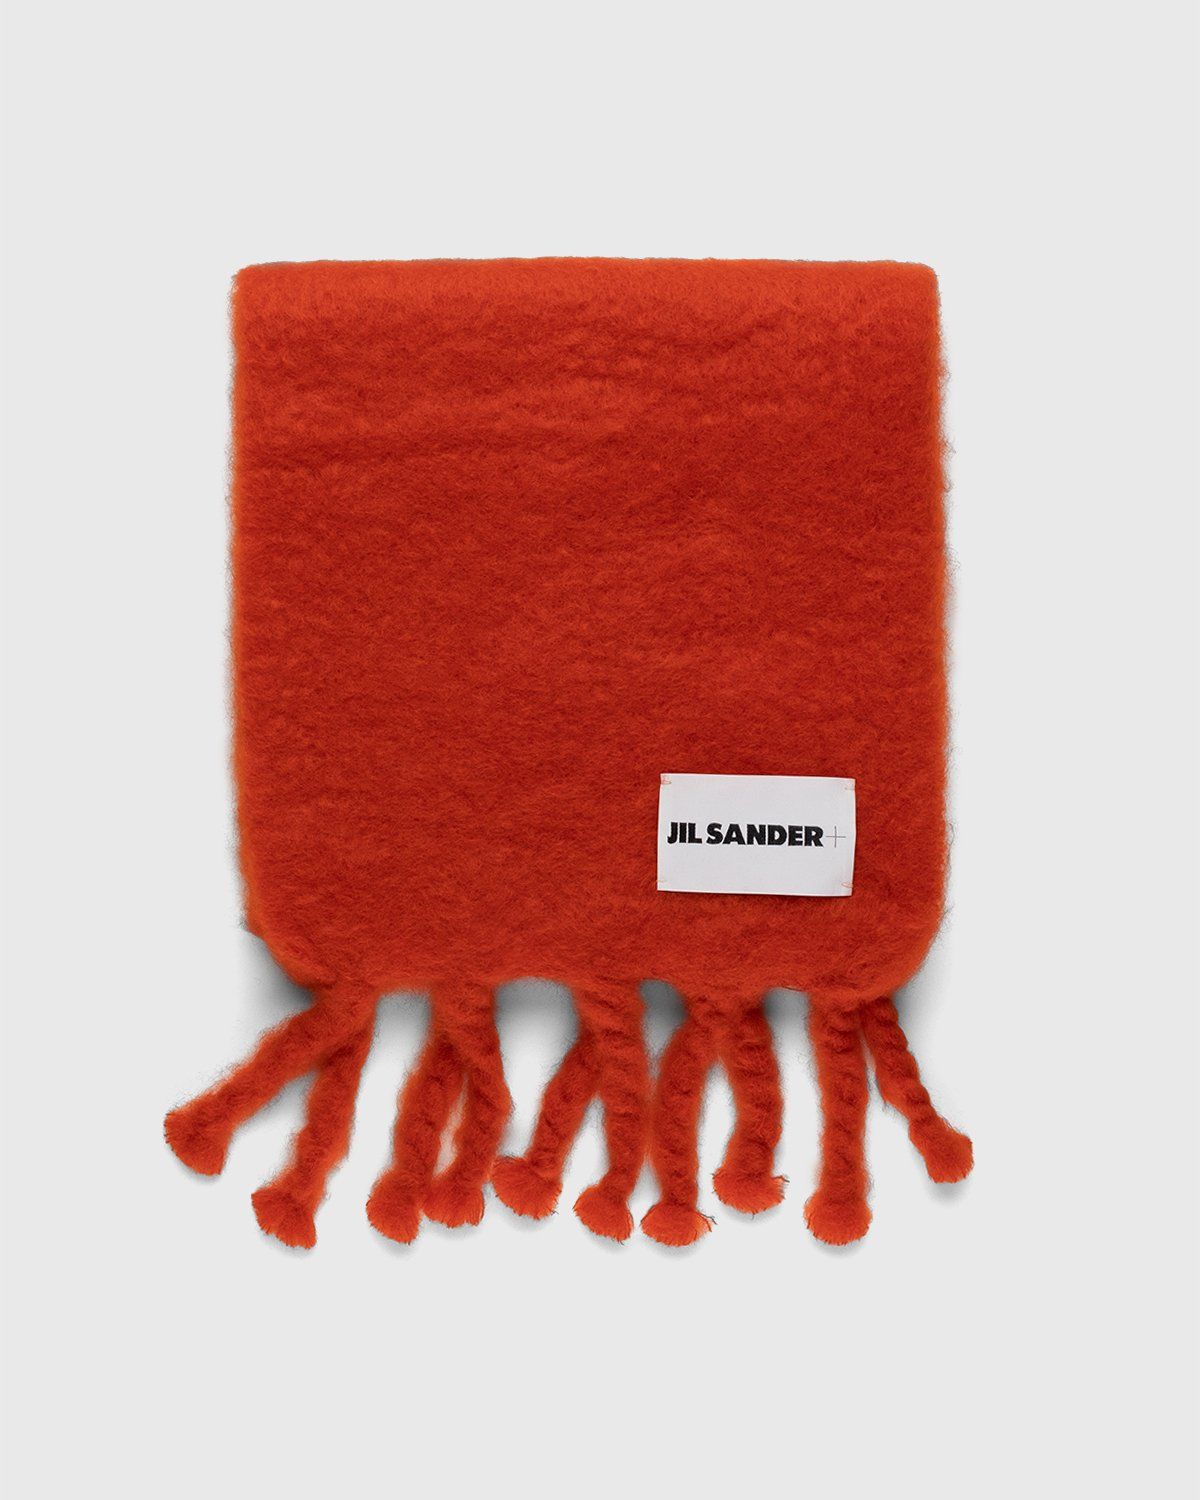 Jil Sander – Woven Scarf Red - Knits - Red - Image 2